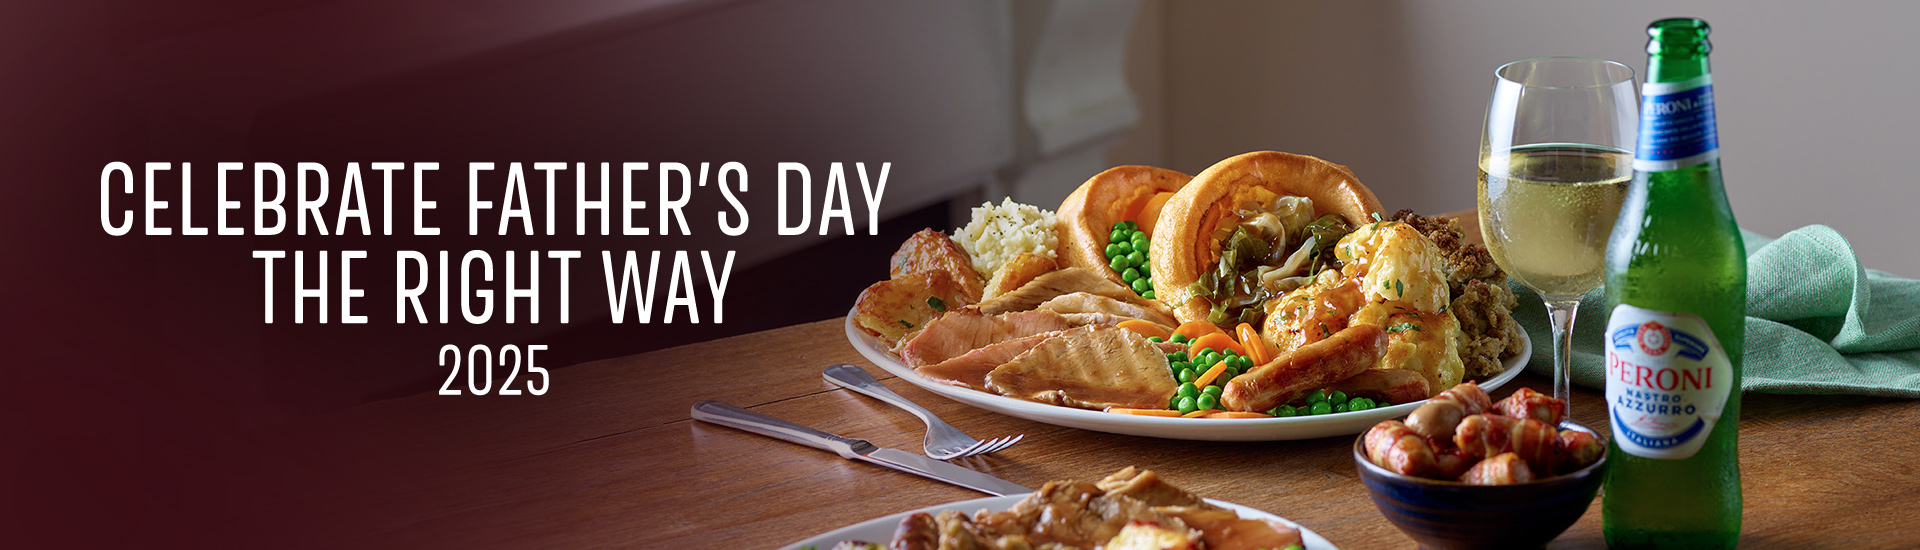 Father’s day carvery in Sunderland